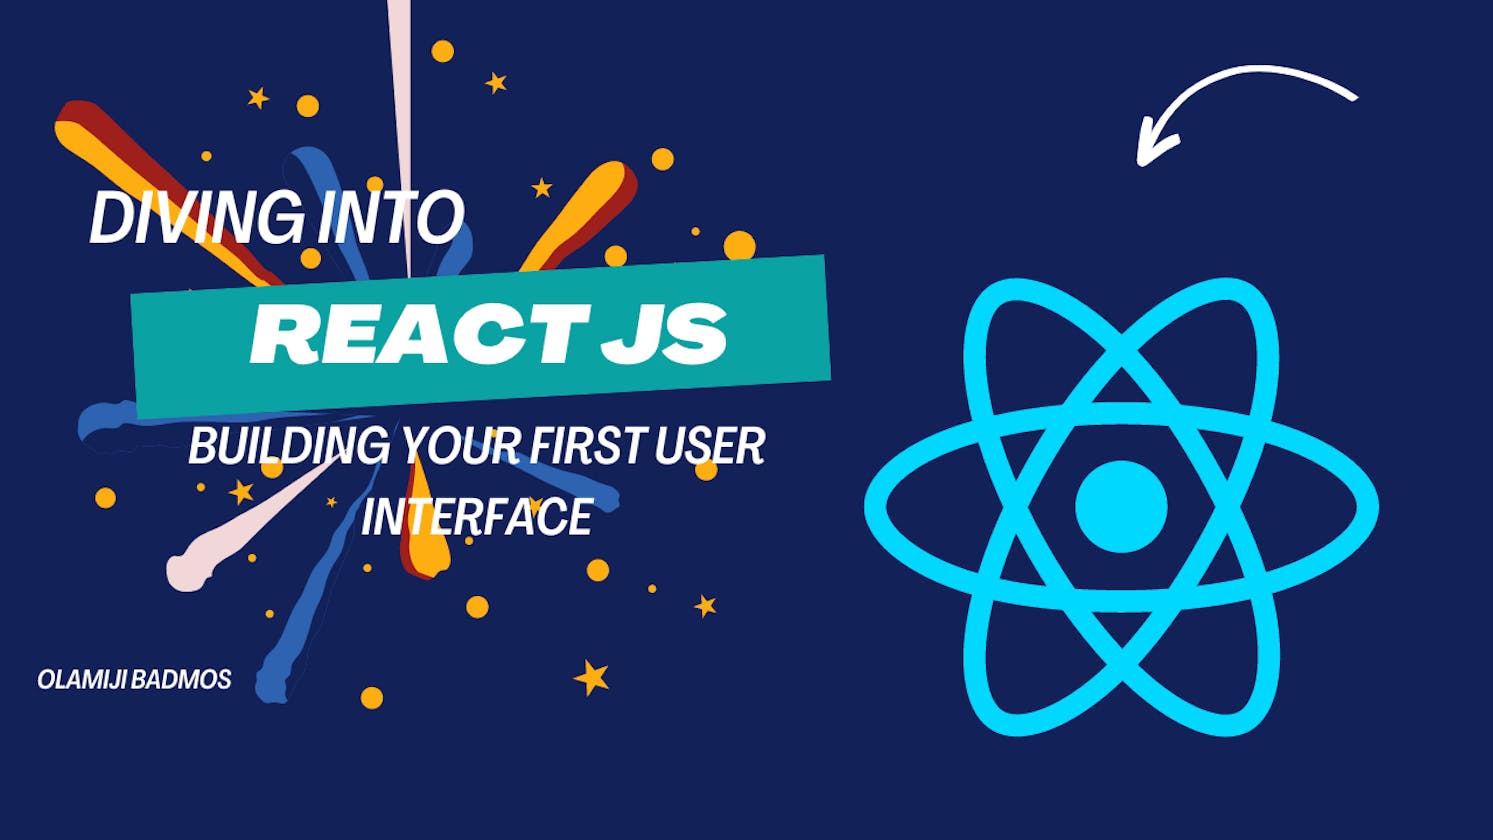 Diving into React: Building Your First User Interface